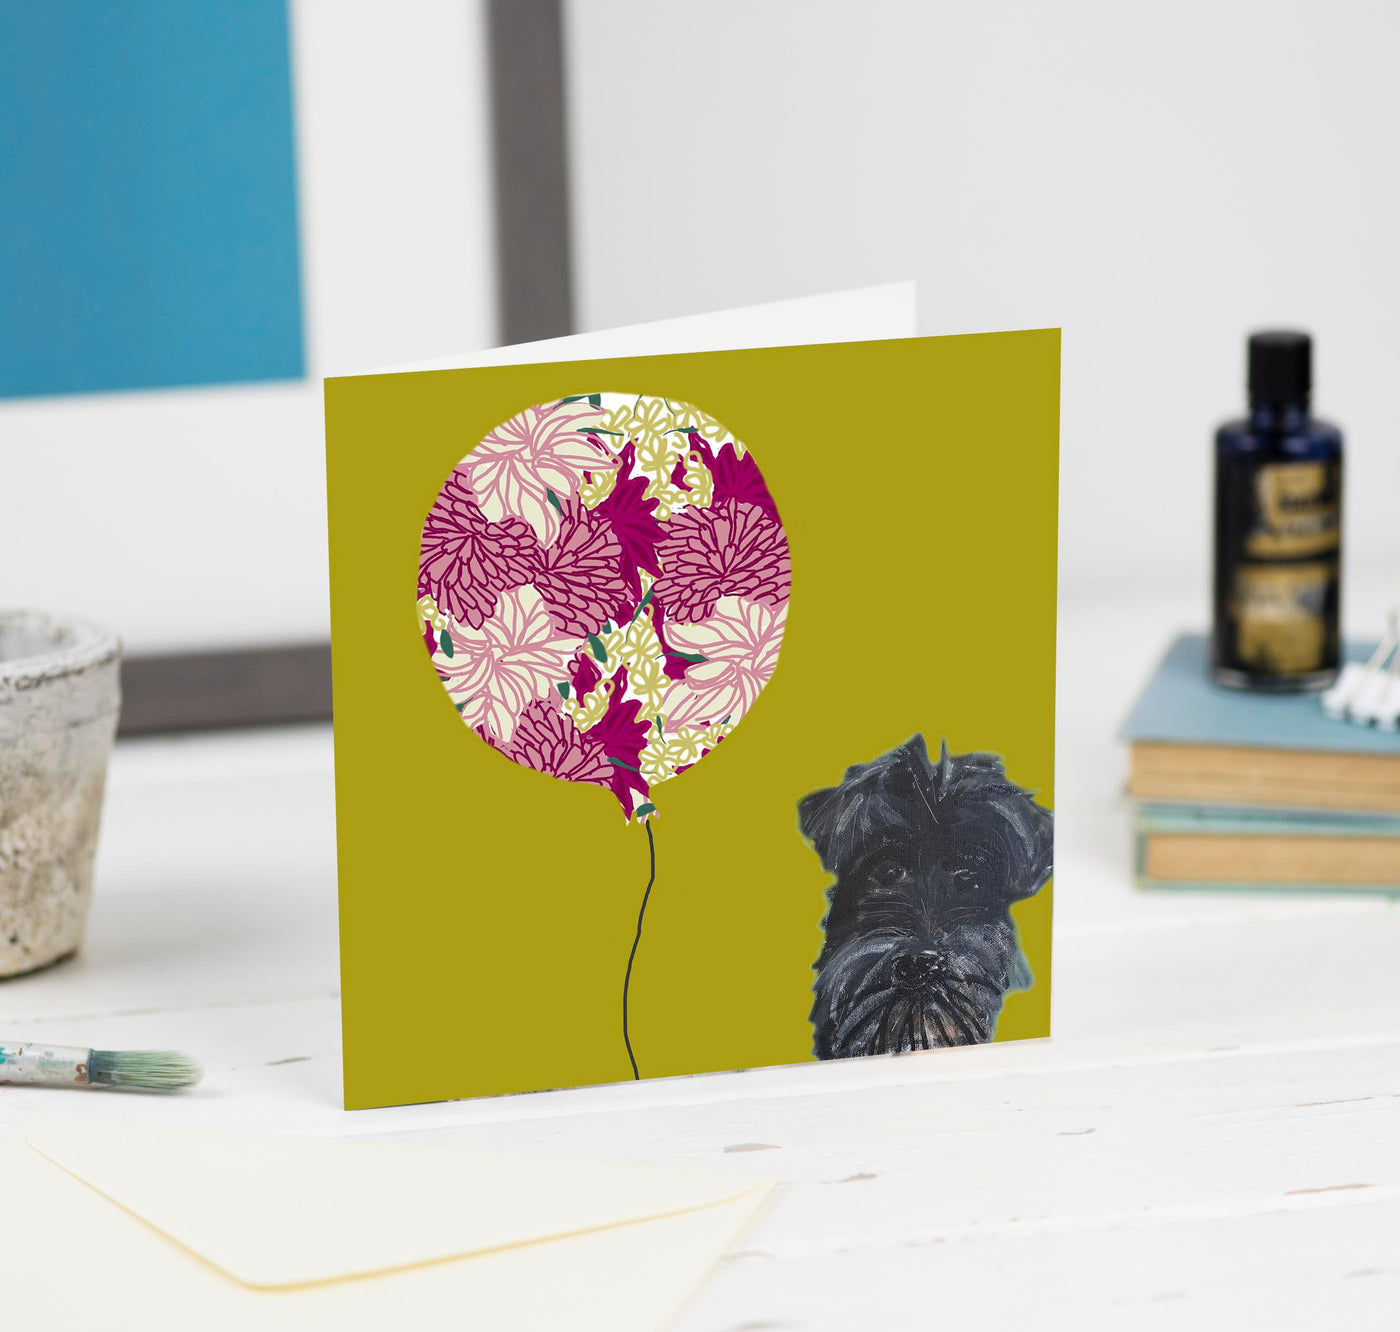 Hector with Patterned Balloon greetings card